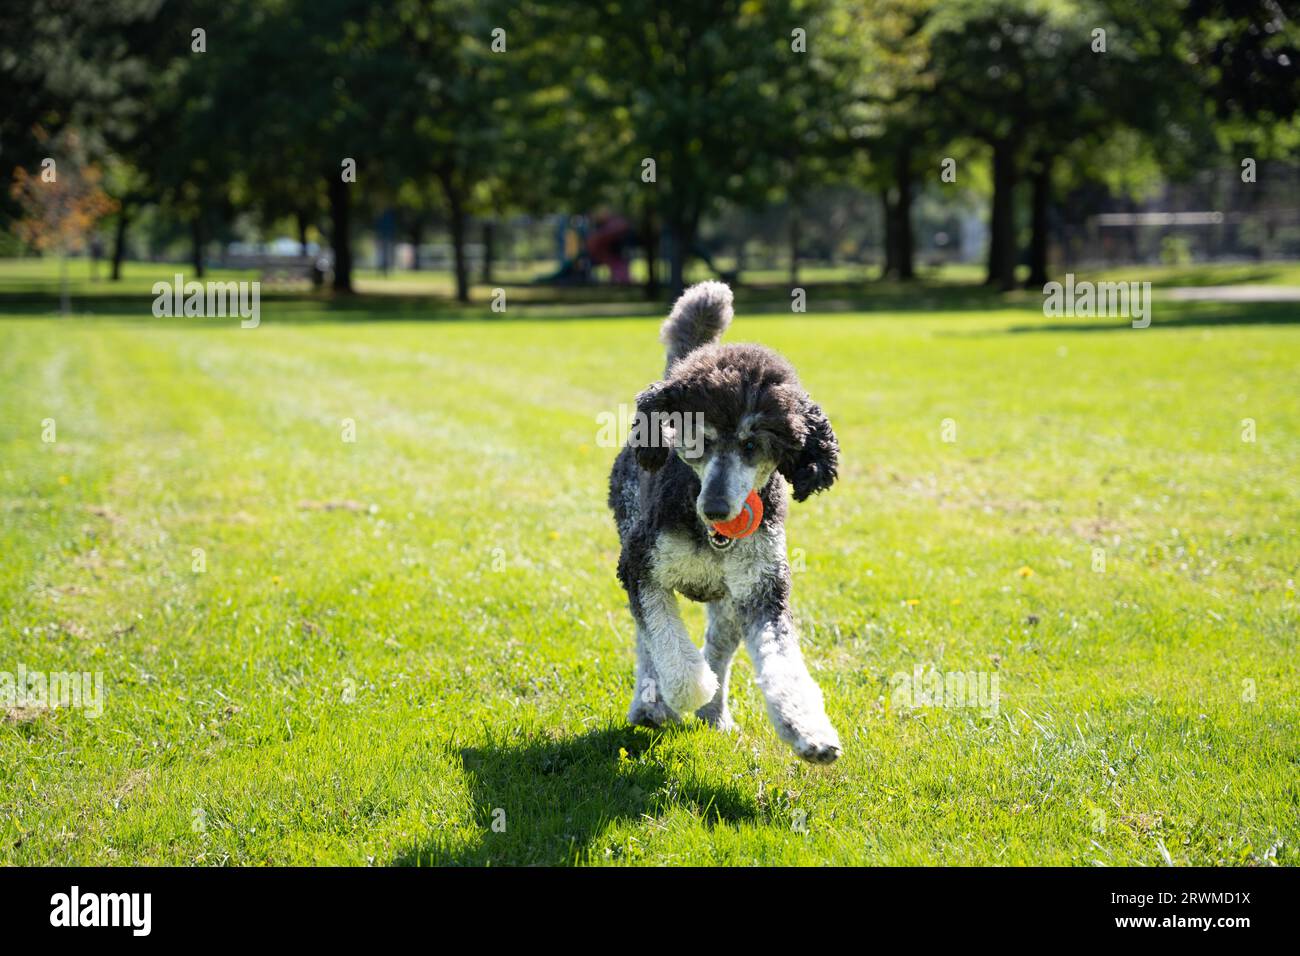 A cute poodle running joyfully on a lush green grassy field, with an orange ball in its mouth Stock Photo